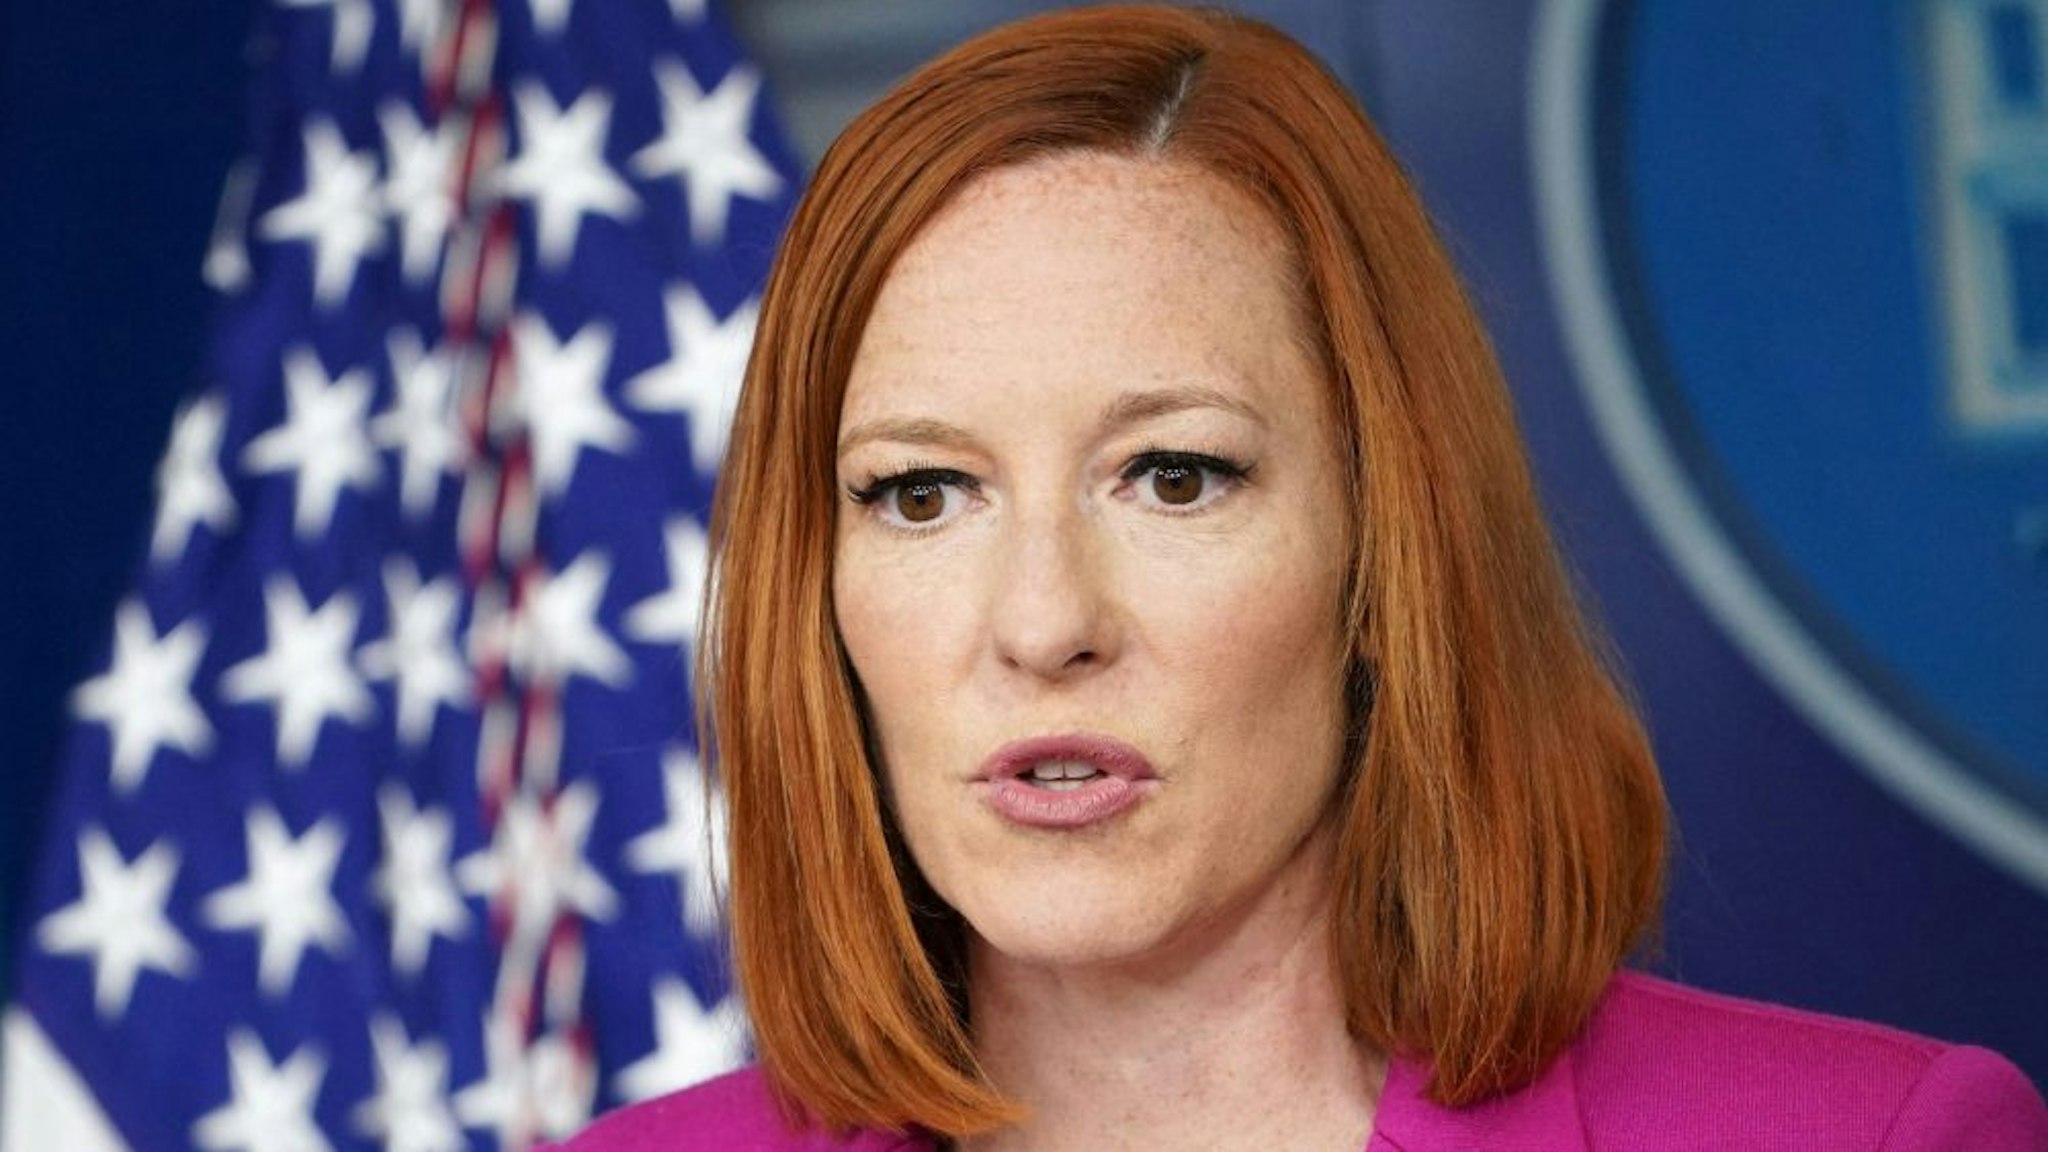 White House Press Secretary Jen Psaki speaks during the daily briefing in the Brady Briefing Room of the White House in Washington, DC on June 22, 2021.